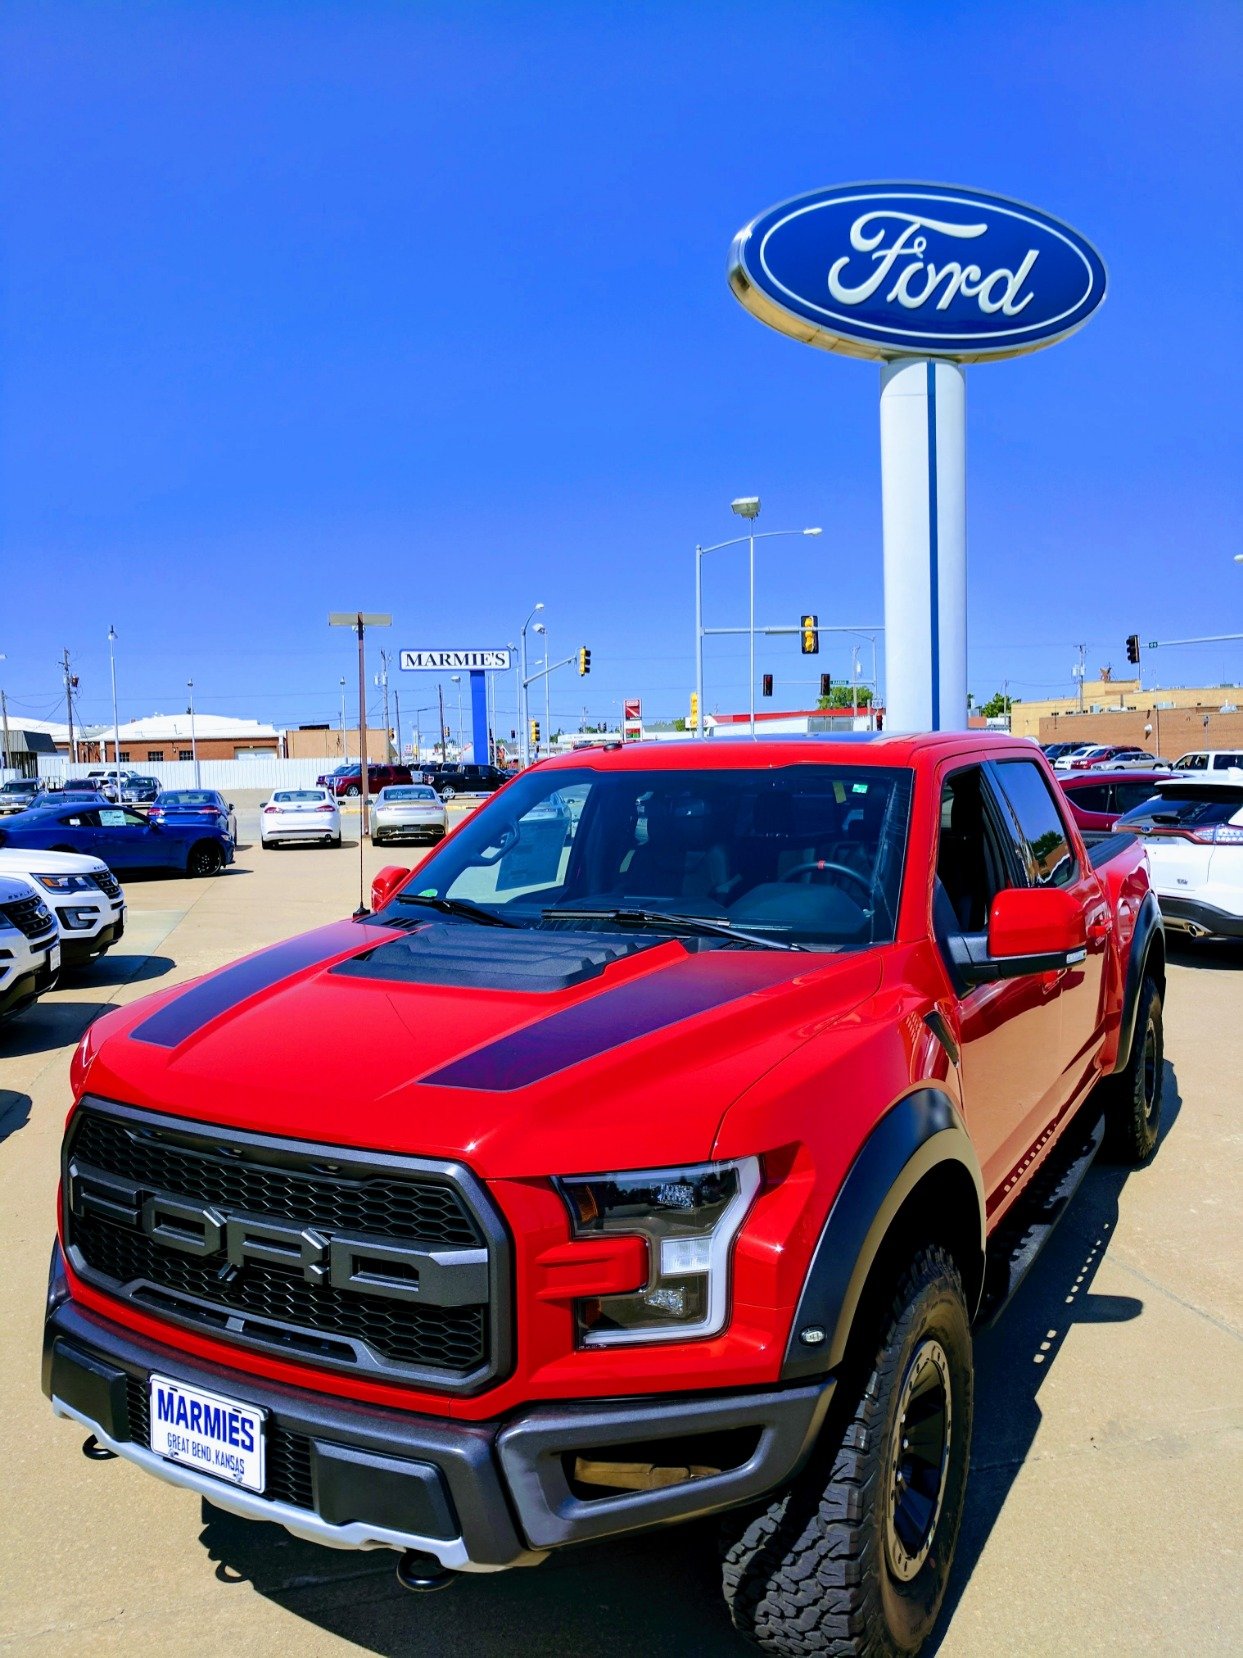 Your New and Program Ford and Lincoln dealership in Central Kansas! Marmies...Make It Happen!